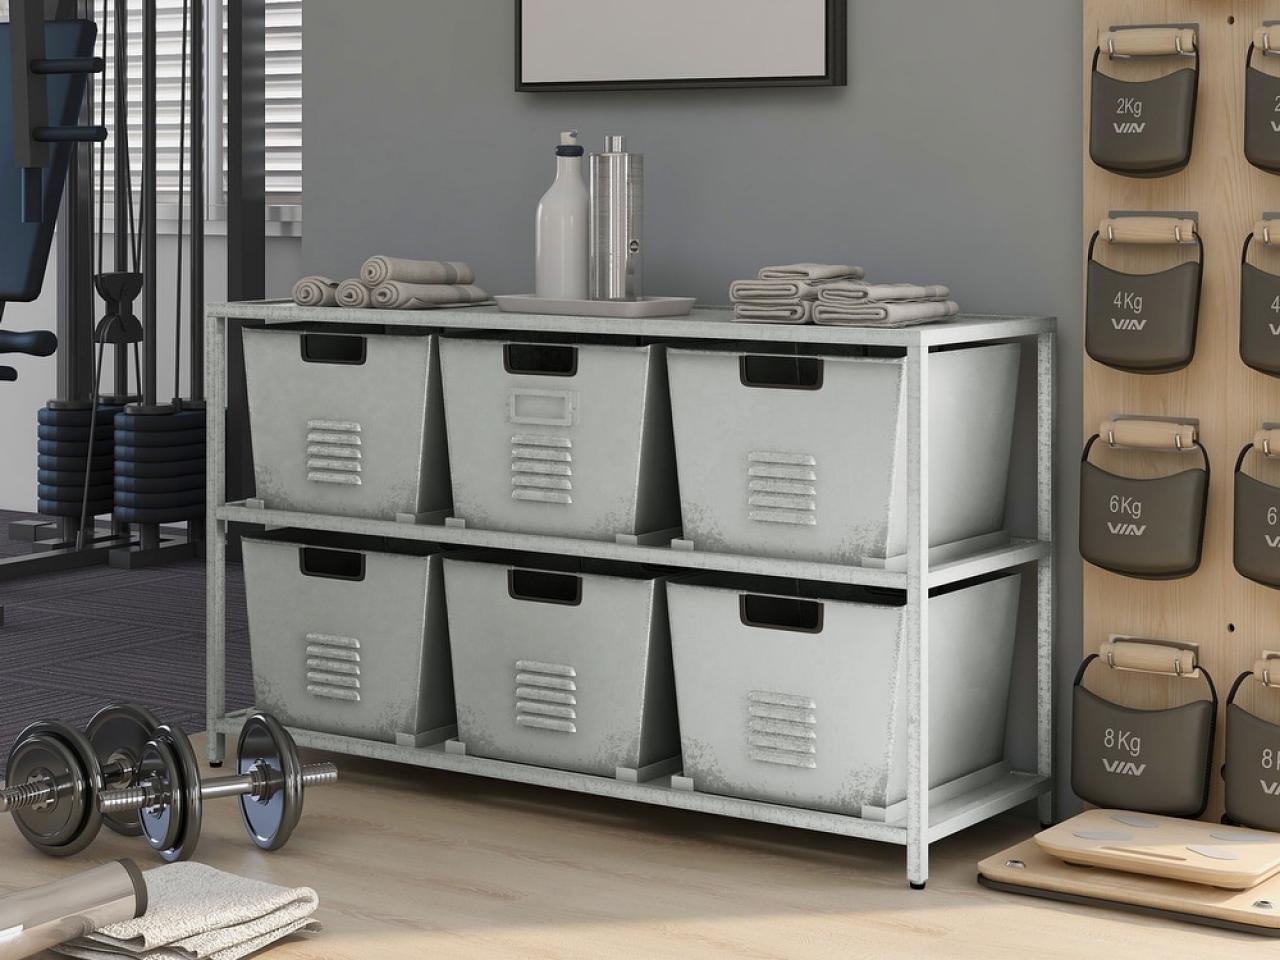 Very handy - Commercial Swiveling hardware organizer - cube storage.